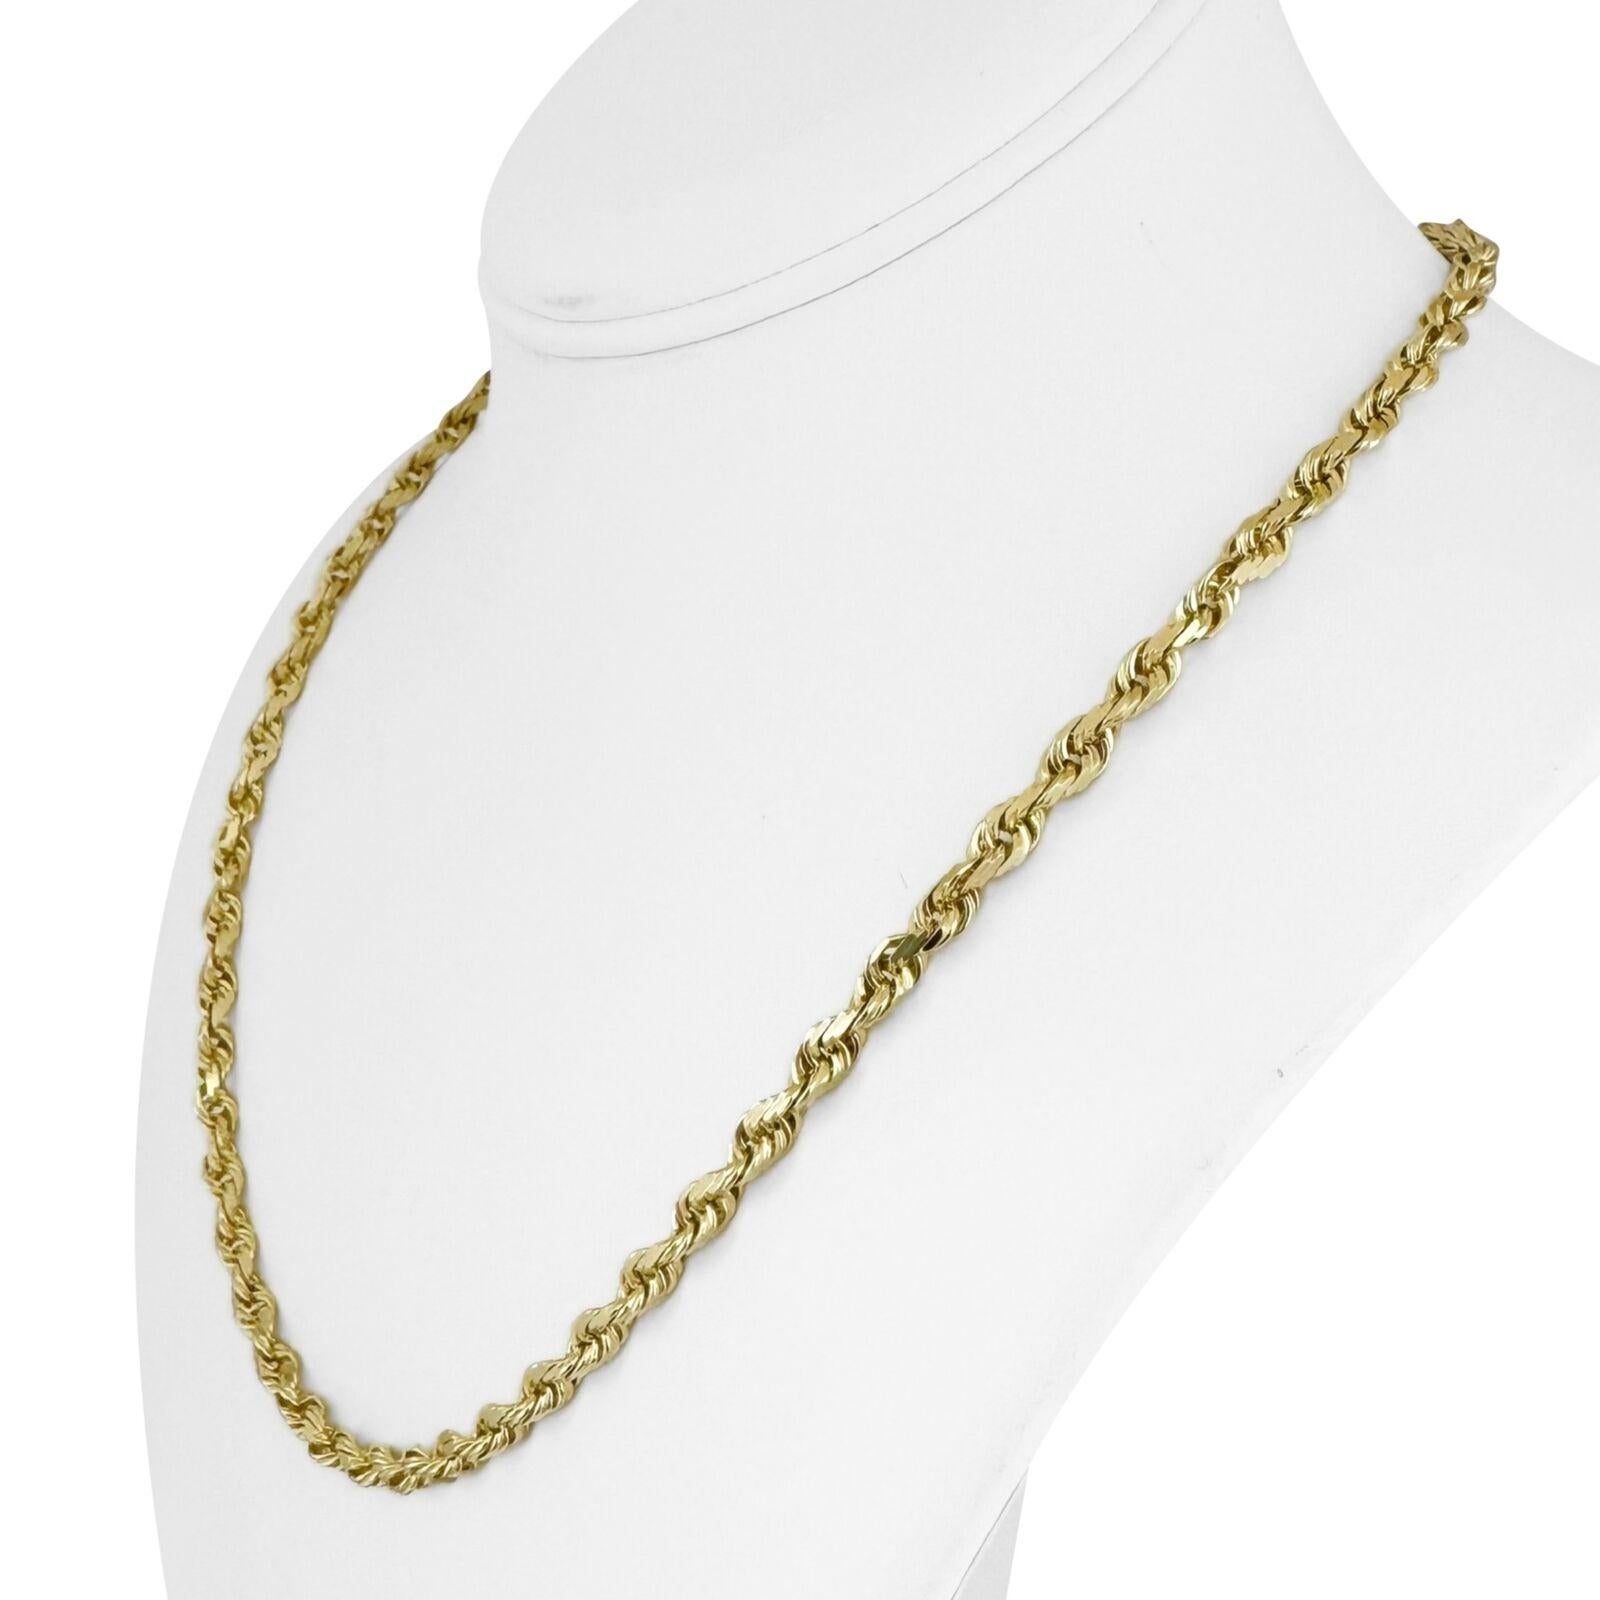 14k Yellow Gold 27.7g Solid Diamond Cut 4.5mm Rope Chain Necklace 20